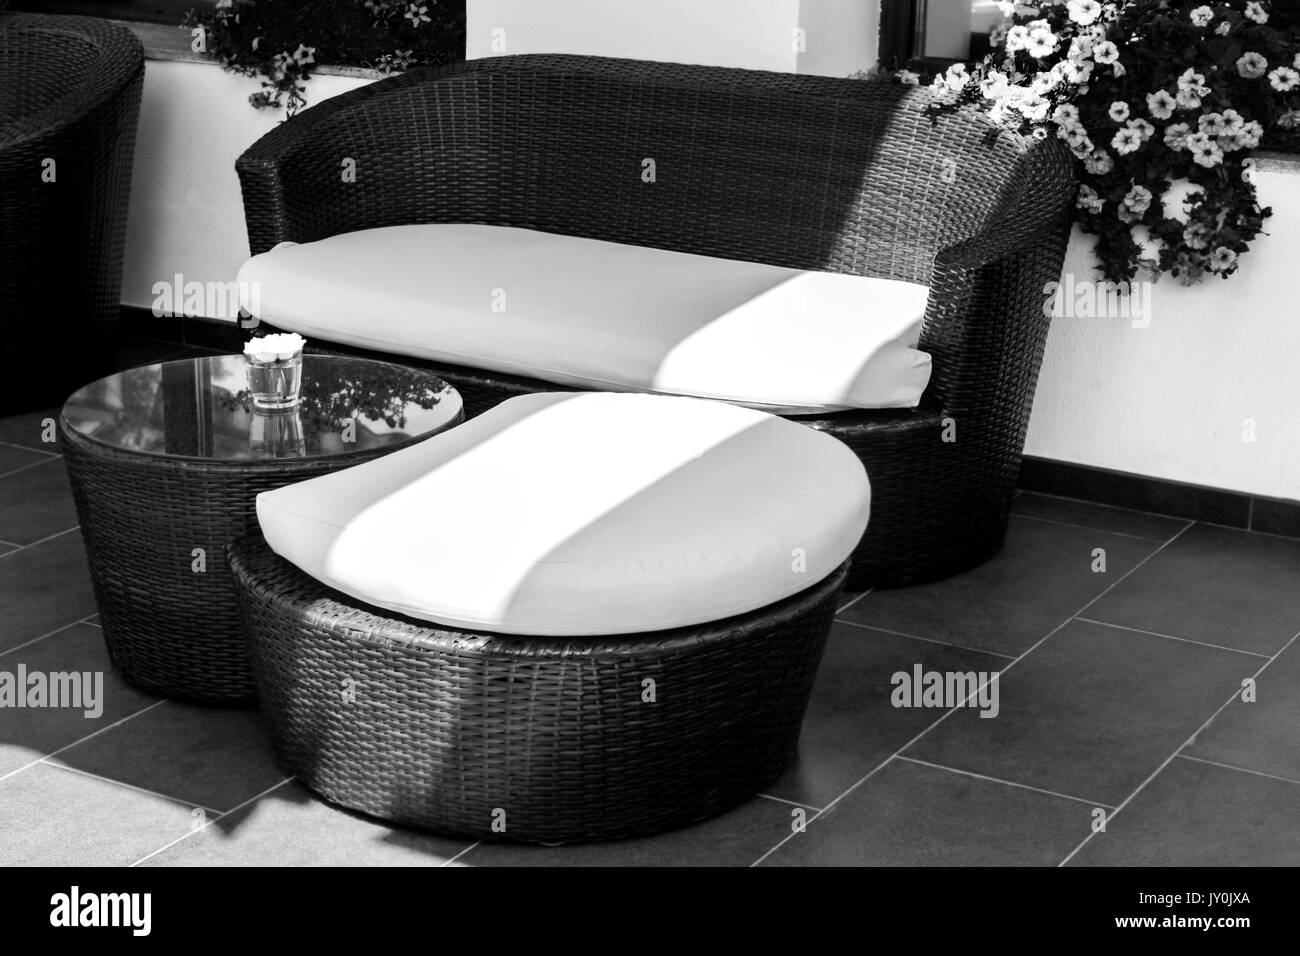 Wicker furniture in lounge area for relax at day in black and white Stock Photo